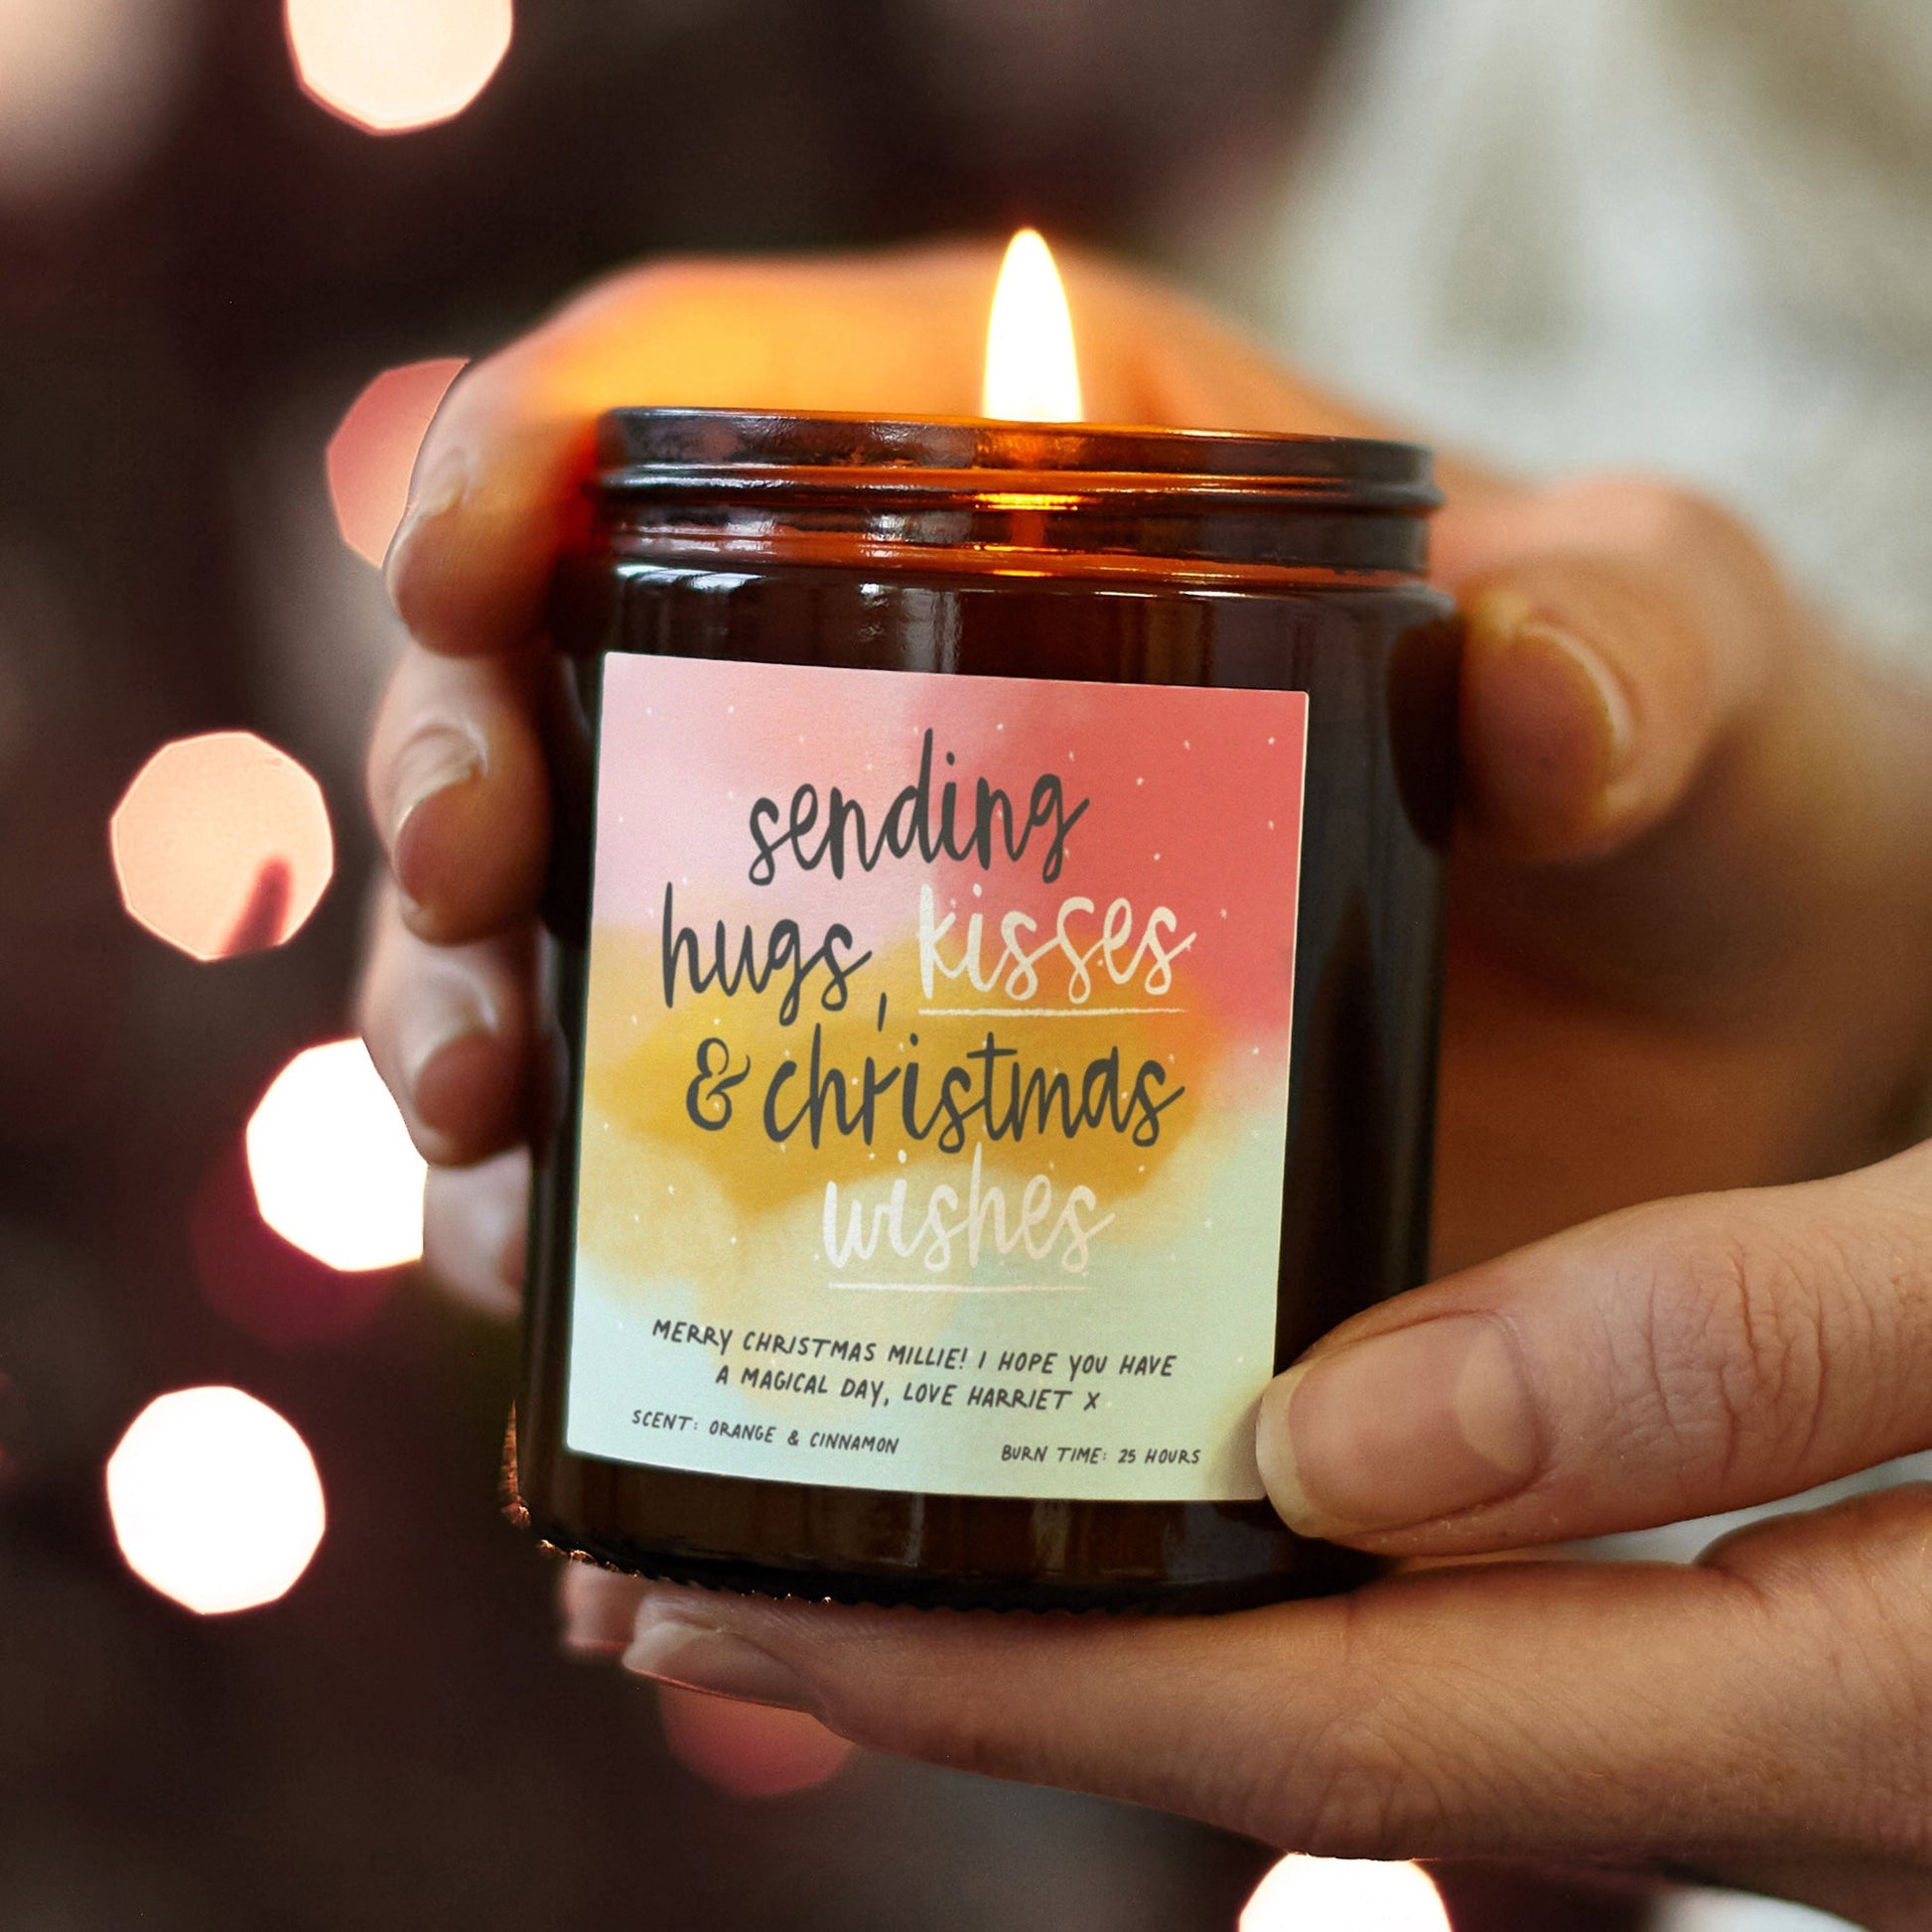 Hugs Kisses & Christmas Wishes Rainbow Candle Gift - Kindred Fires